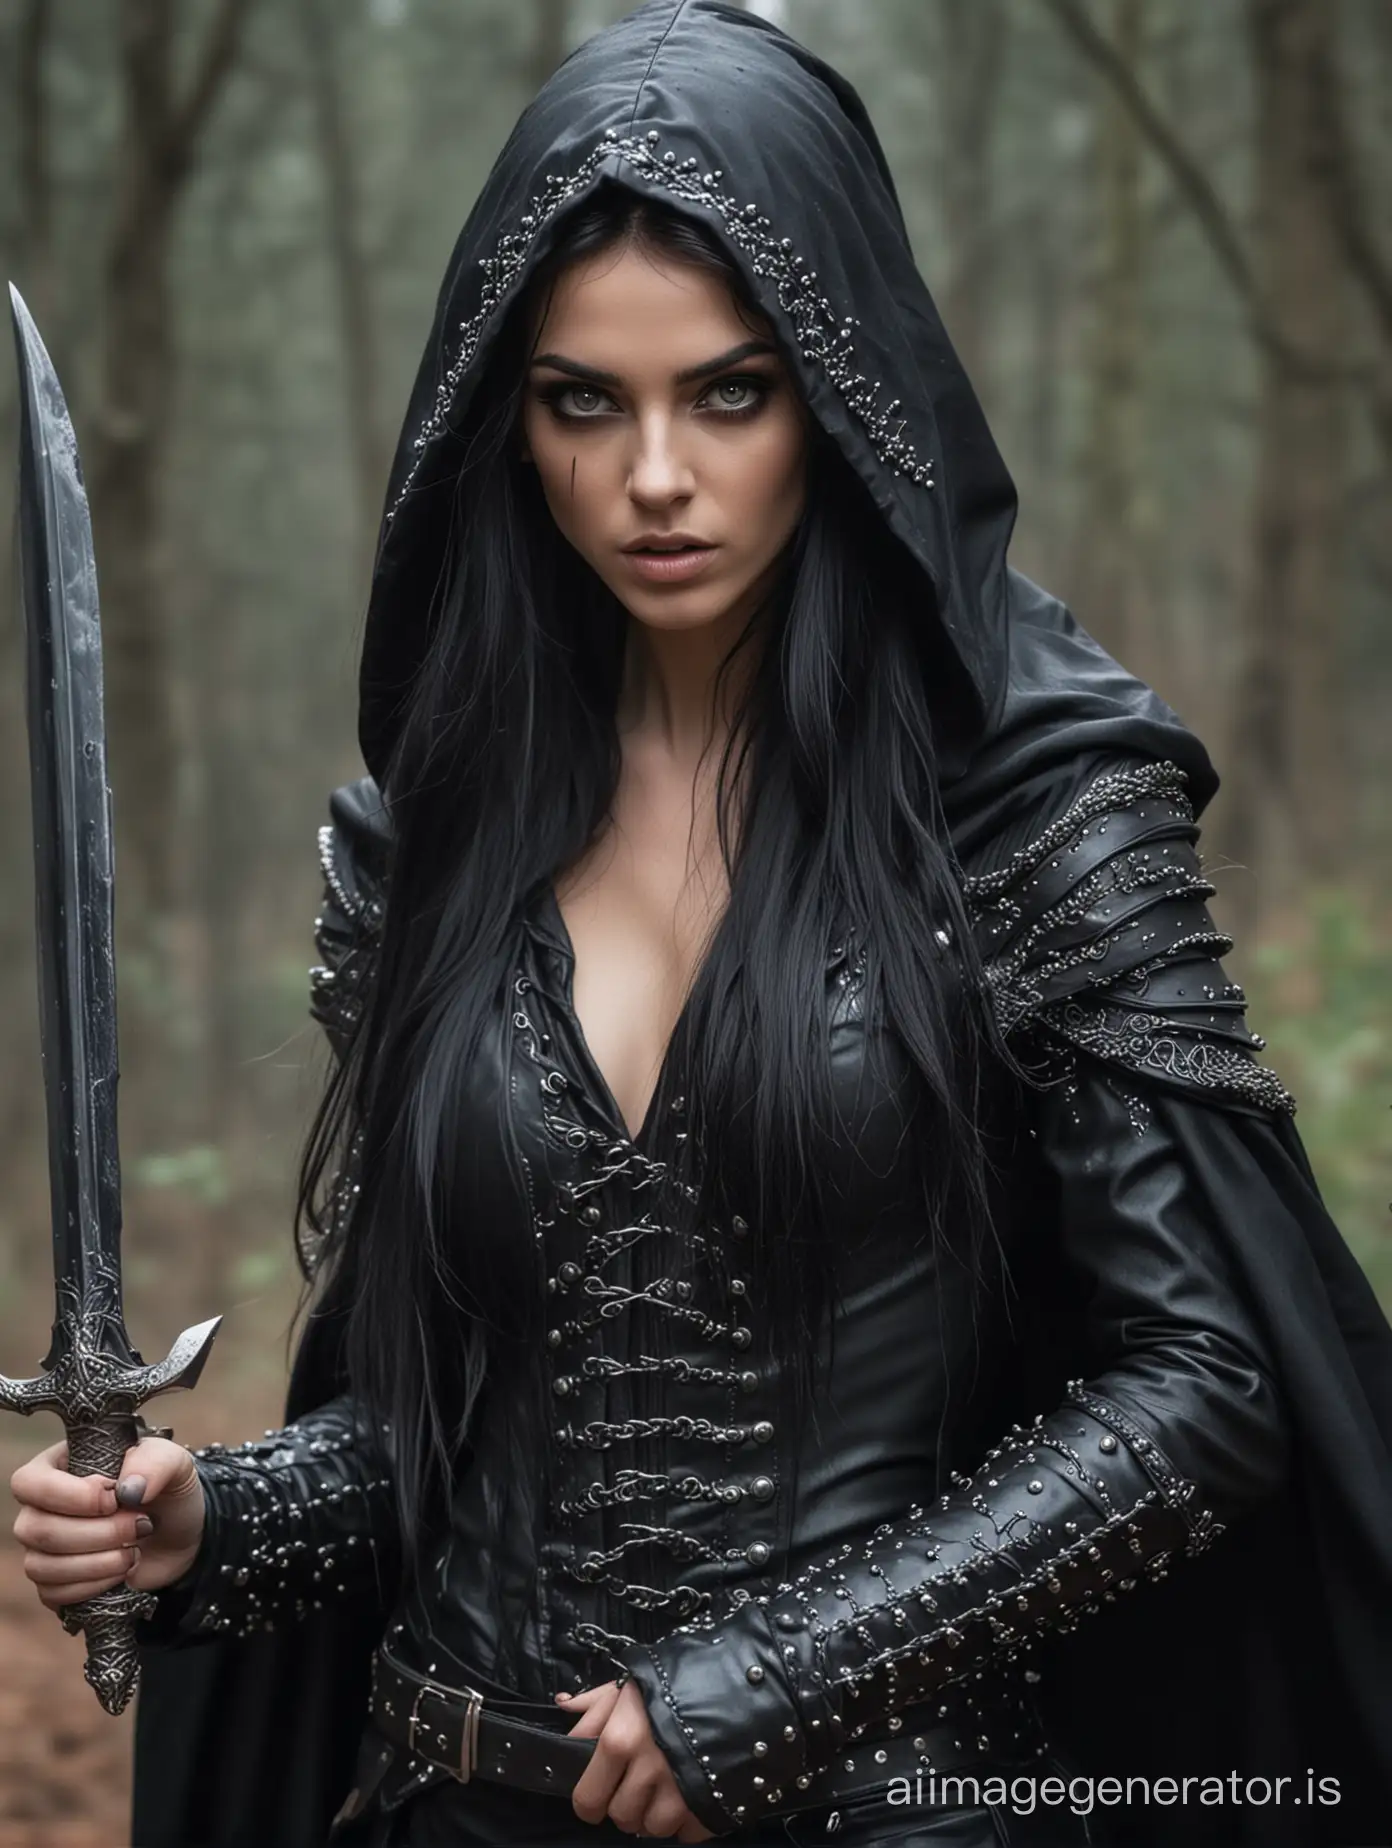 Young skinny female elf with very long black hair and bard running eye makeup. wearing a hooded cloak and black studded leather armor. sexy holding a dagger